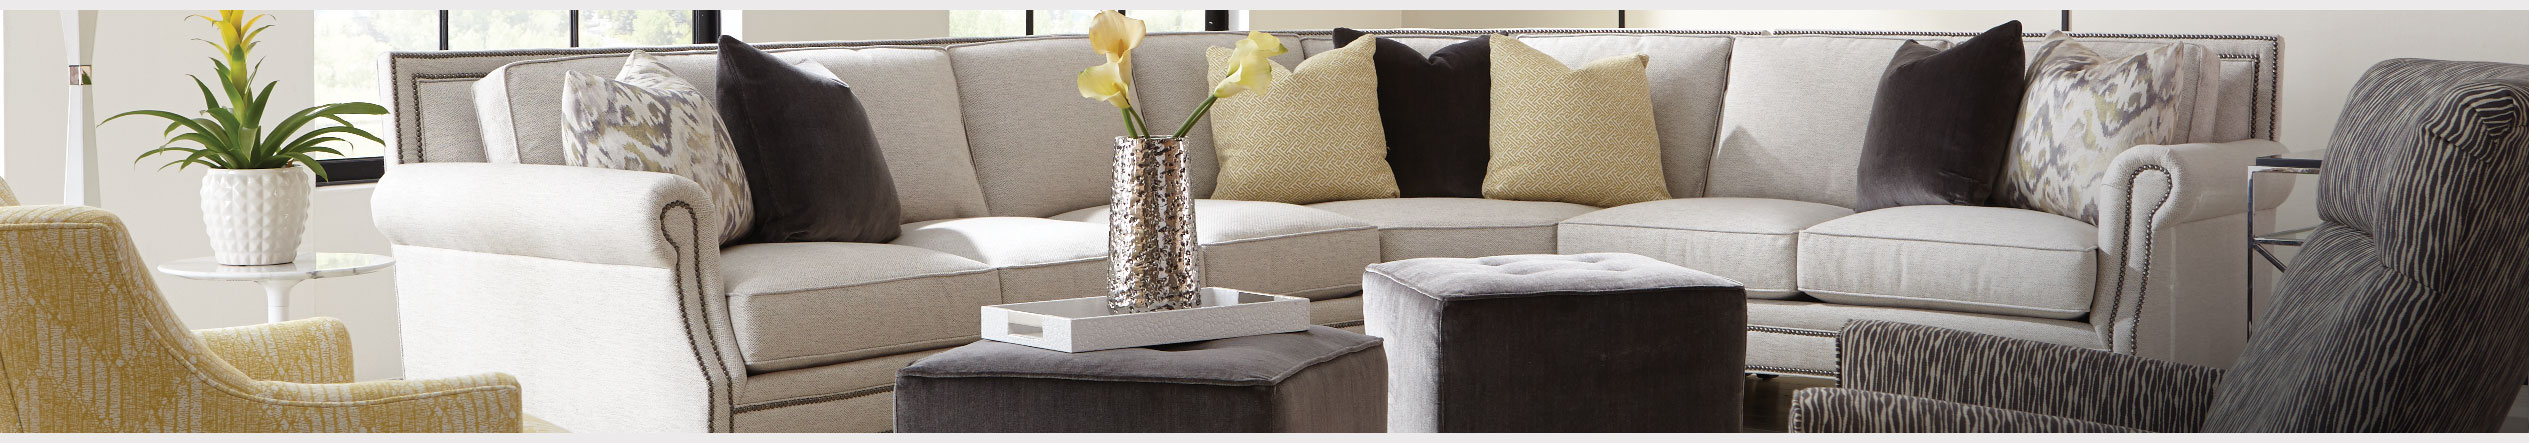 Maintain Your Investment at Jordan's Furniture stores in MA, NH and RI